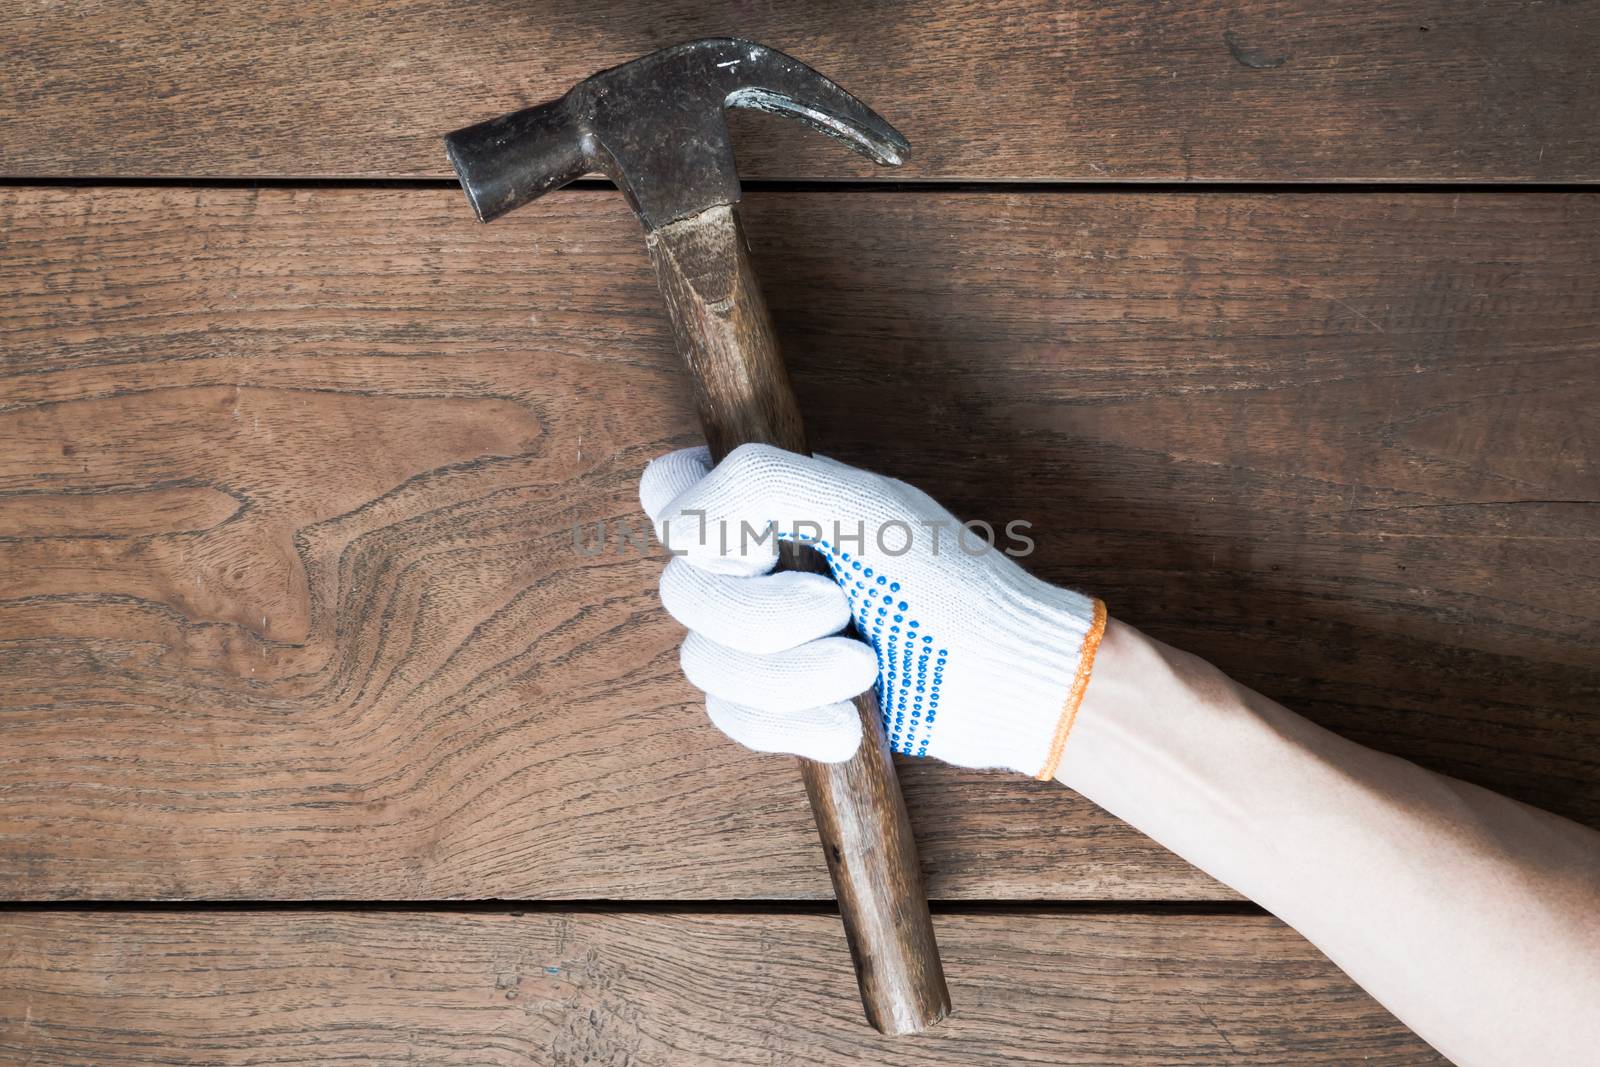 Hand holding hammer on wooden table background.